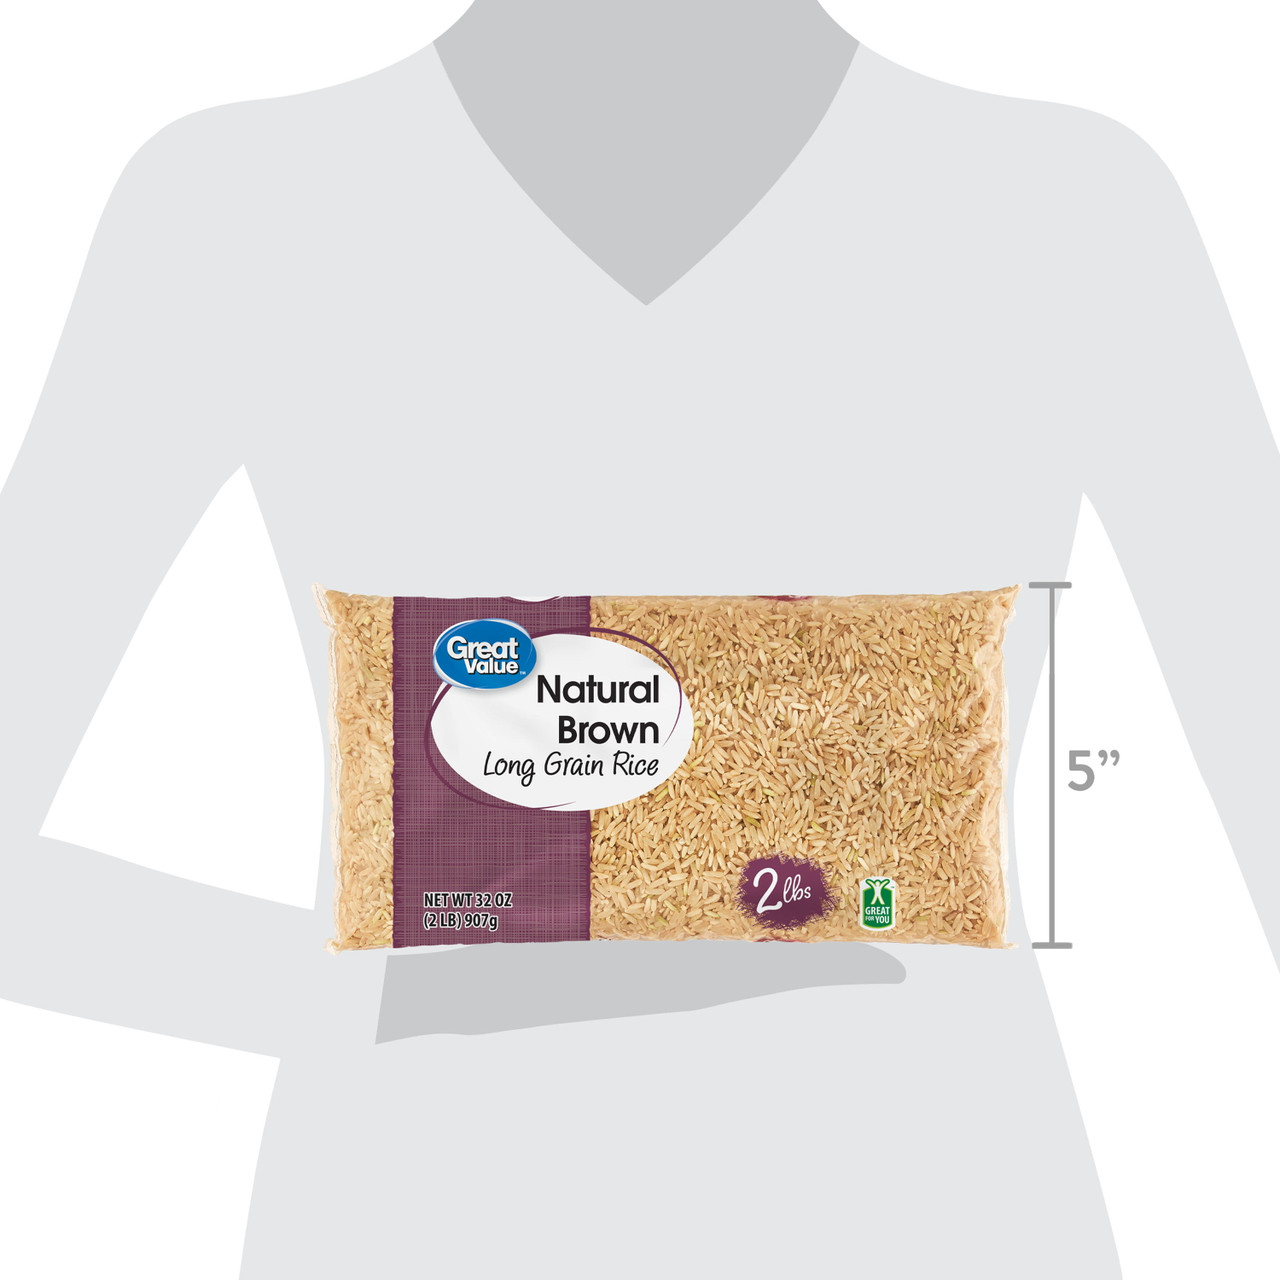 Great Value Natural Brown Long Grain Rice, 32 oz - [From 9.00 - Choose pk Qty ] - *Ships from Miami